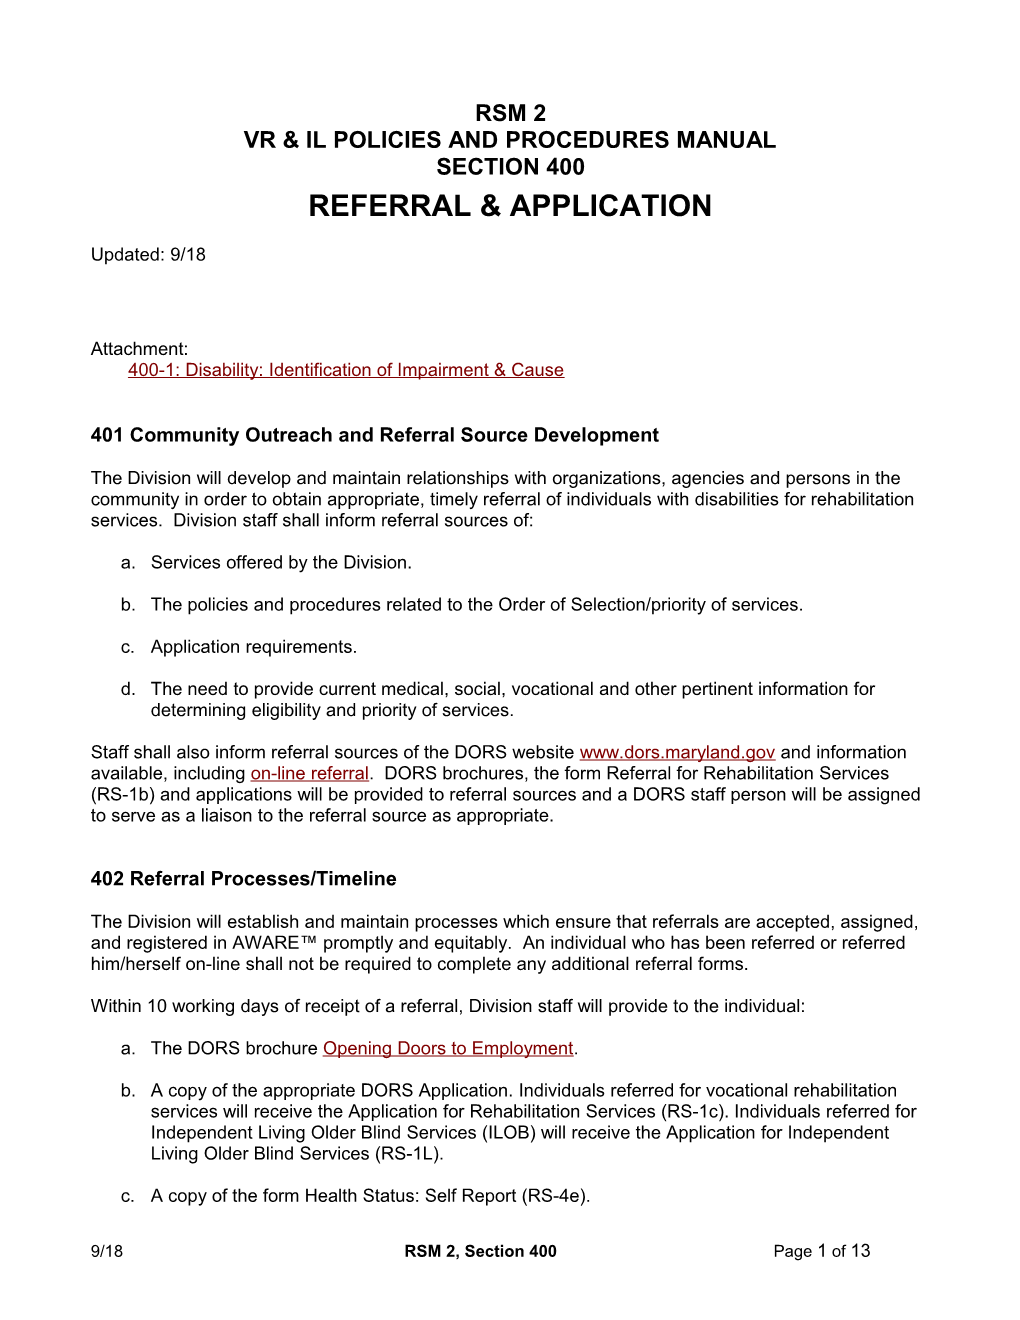 RSM 2, Section 400: Referral and Application